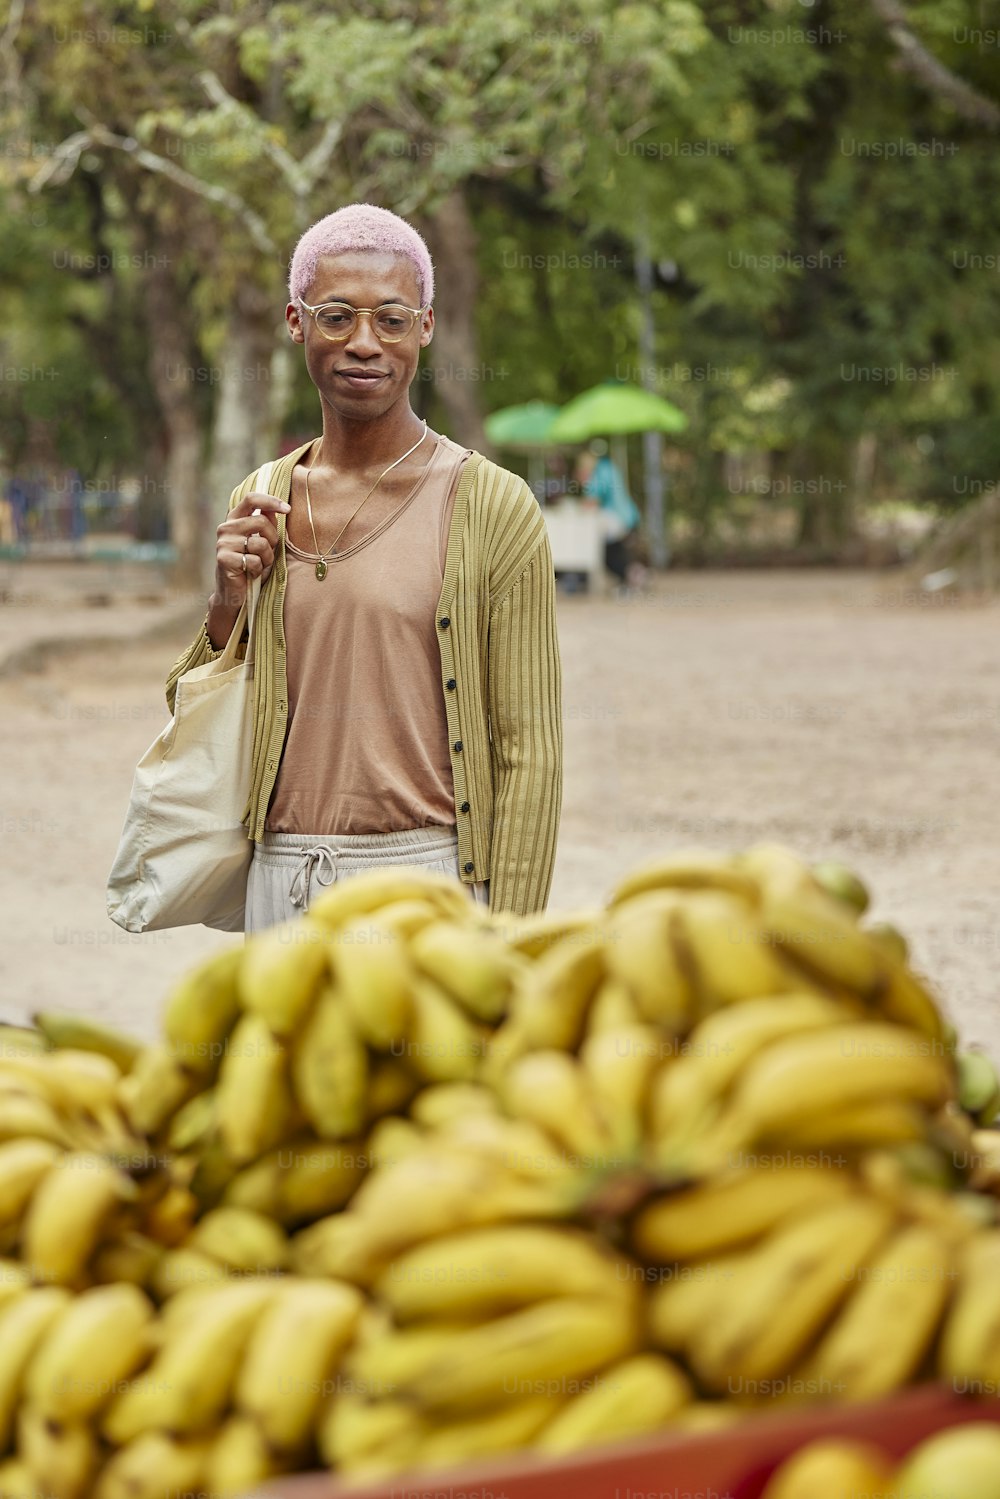 a man standing next to a pile of bananas